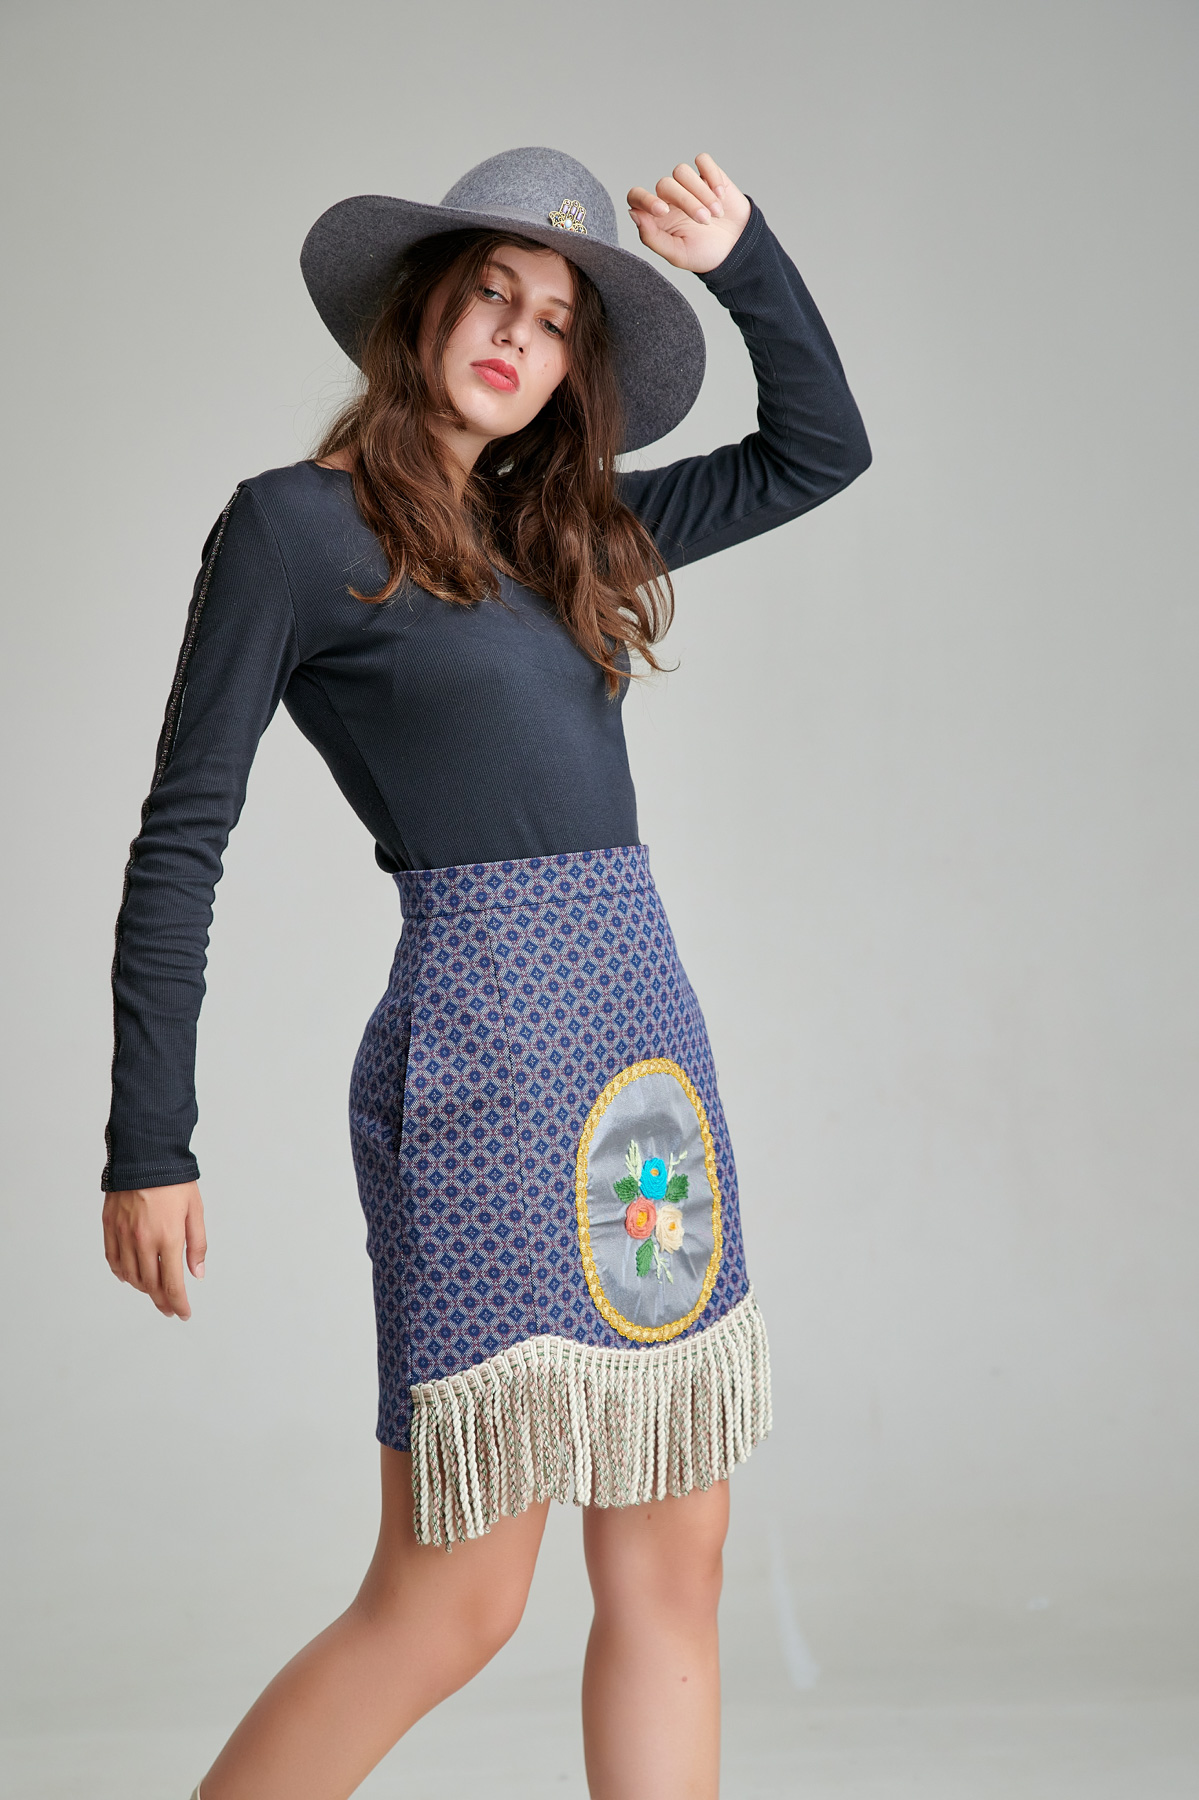 CRINA skirt with fringes and floral embroidery. Natural fabrics, original design, handmade embroidery